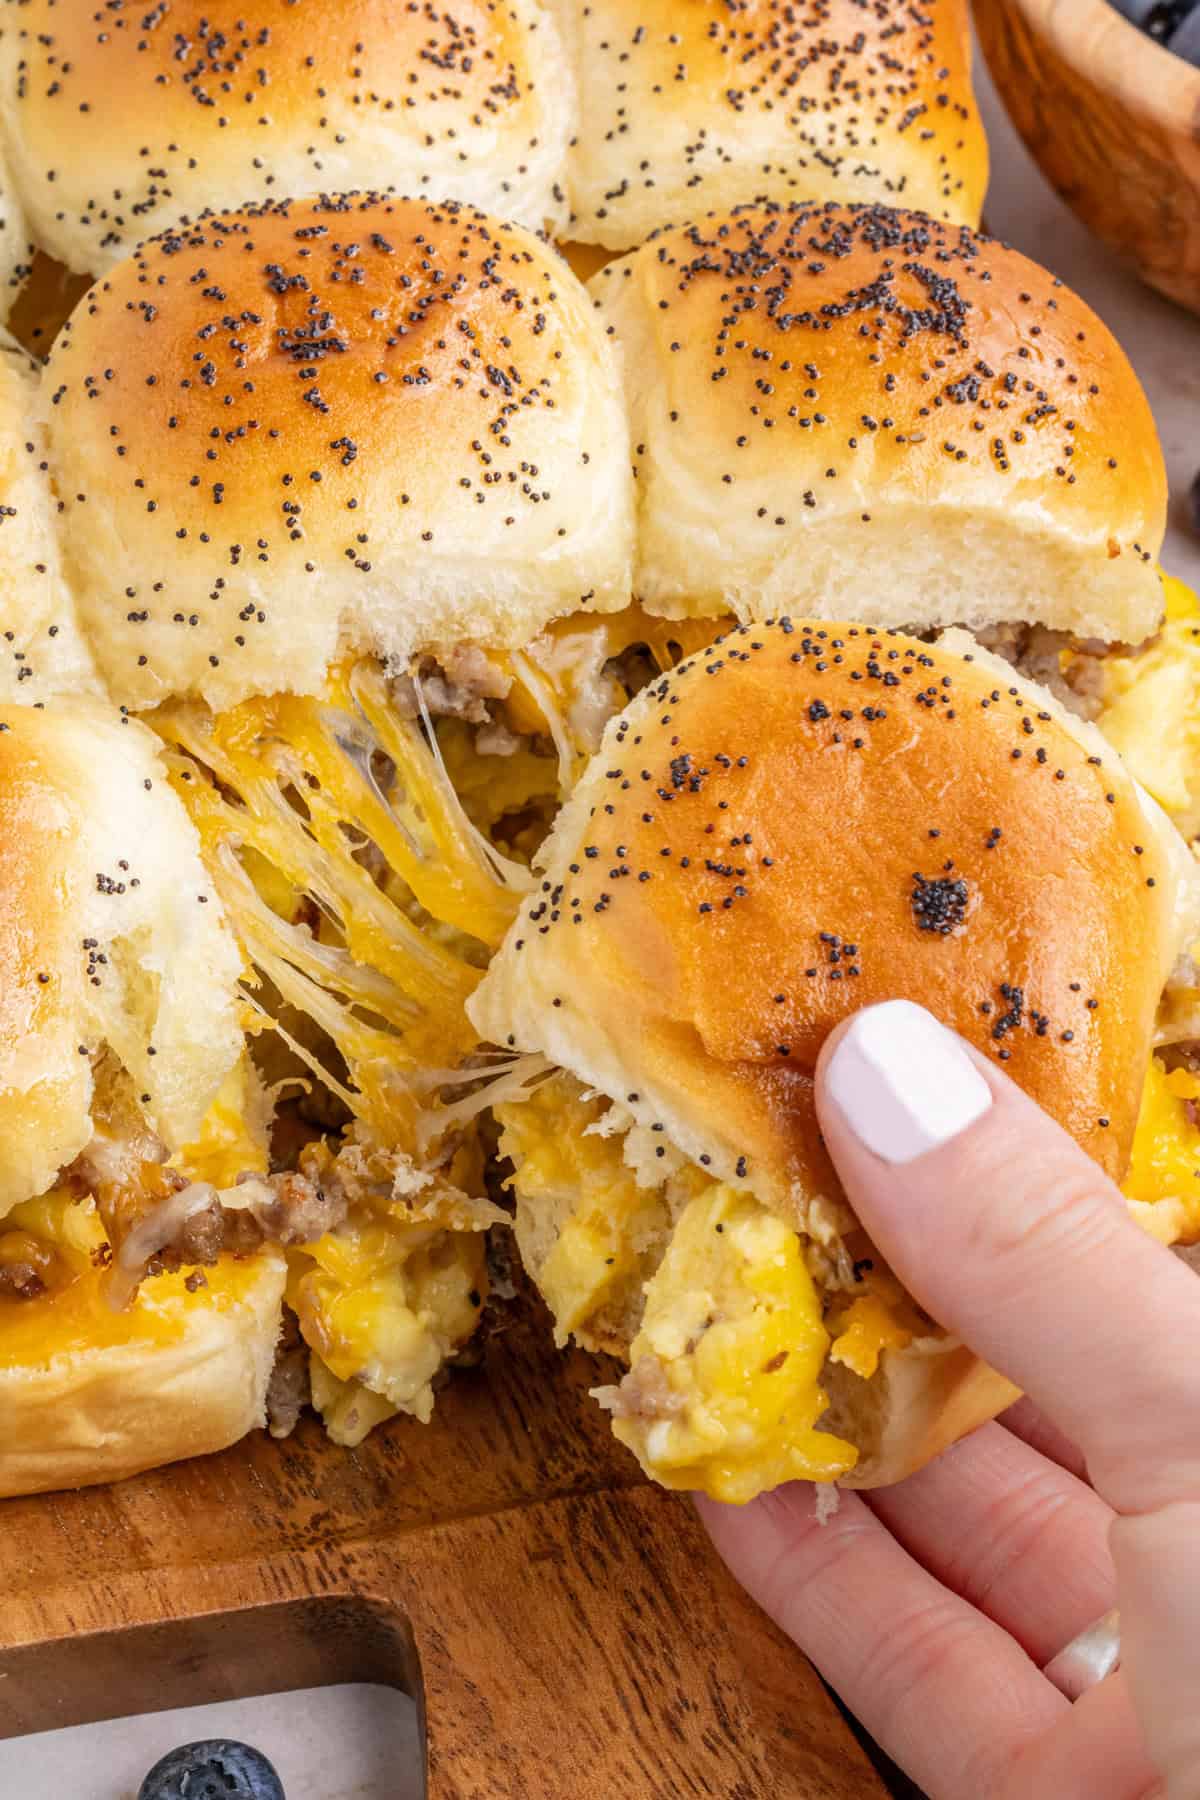 Hand pulling a single cheesy breakfast slider off the sheet of sliders.